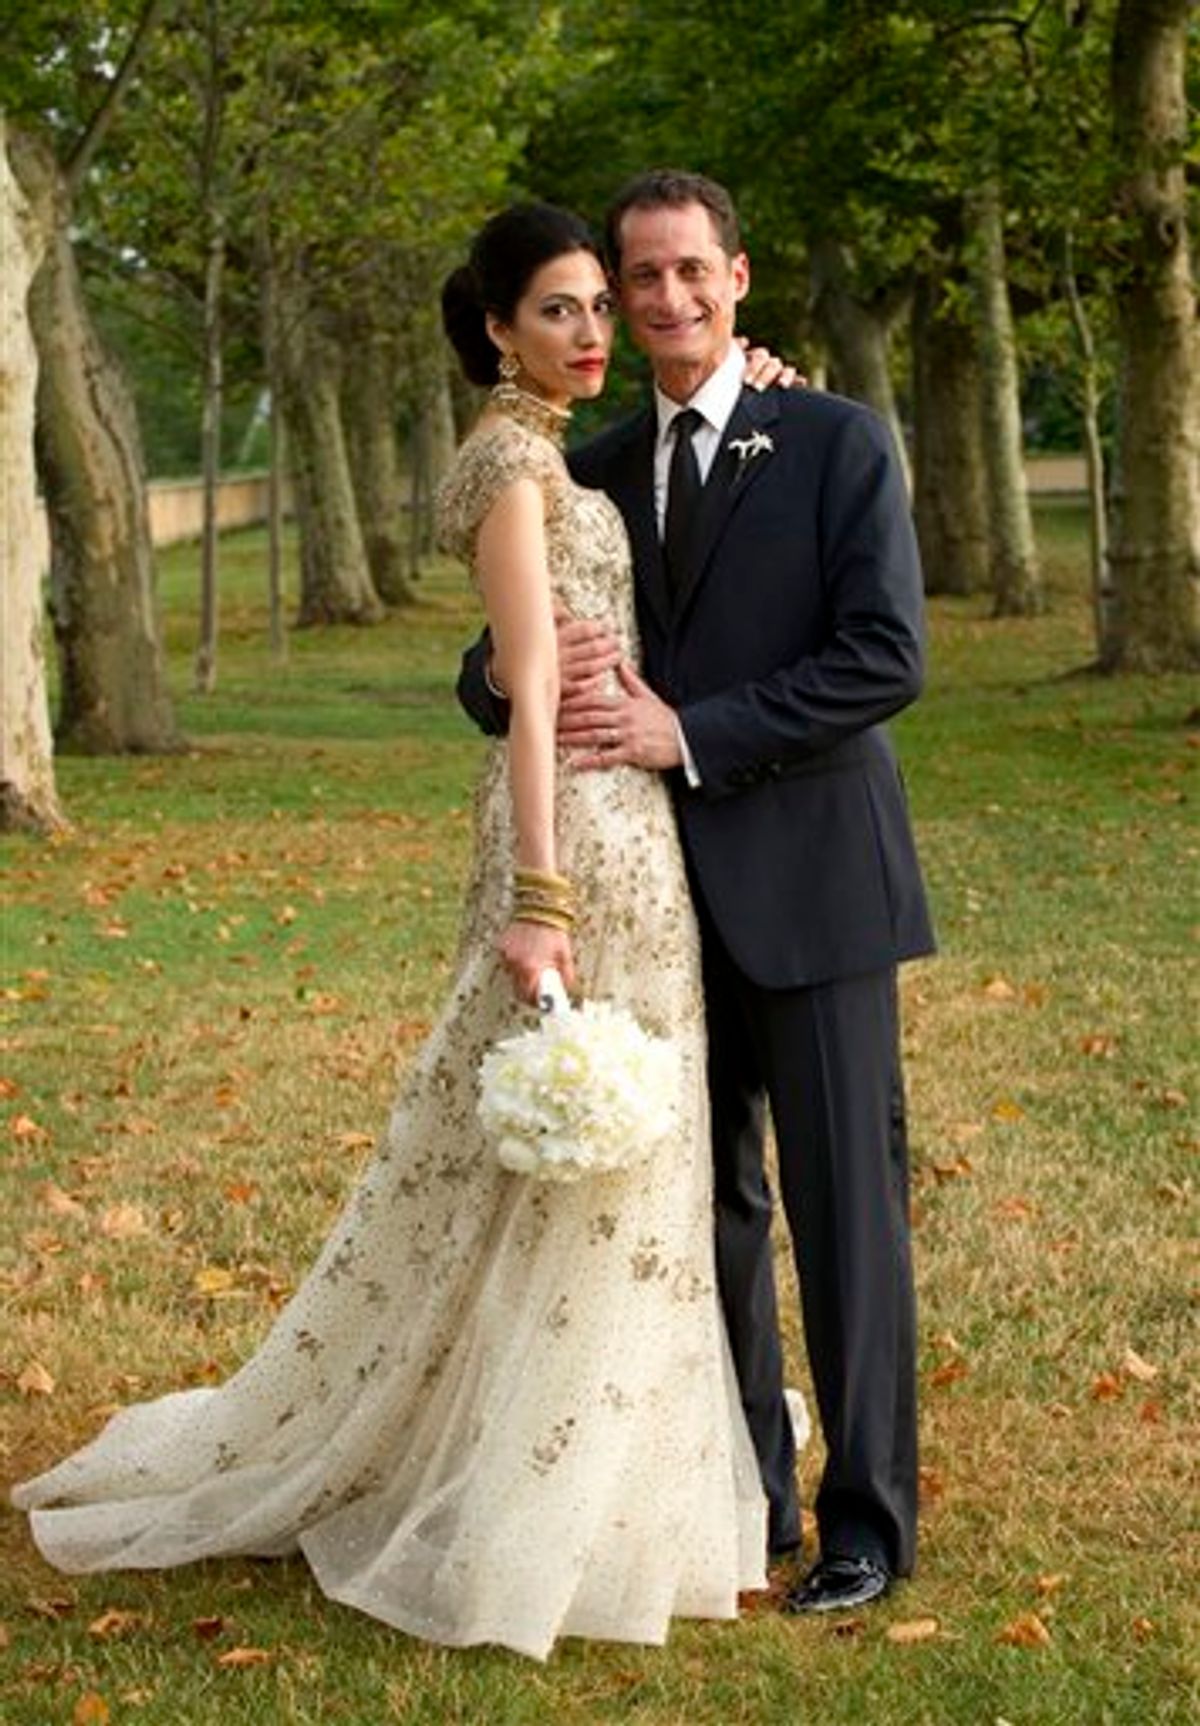 FILE - In this July 10, 2010, file photo provided by Marie Ternes, Rep. Anthony Weiner, D-N.Y., poses with his wife Huma Abedin, close aide to Secretary of State Hillary Rodham Clinton, for a formal wedding portrait at the Oheka Castle in Huntington, N.Y.  Weiner confessed Monday, June 6, 2011, that he tweeted a bulging-underpants photo of himself to a young woman and admitted to "inappropriate" exchanges with six women before and after getting married.     (AP Photo/Barbara Kinney, File) (AP)